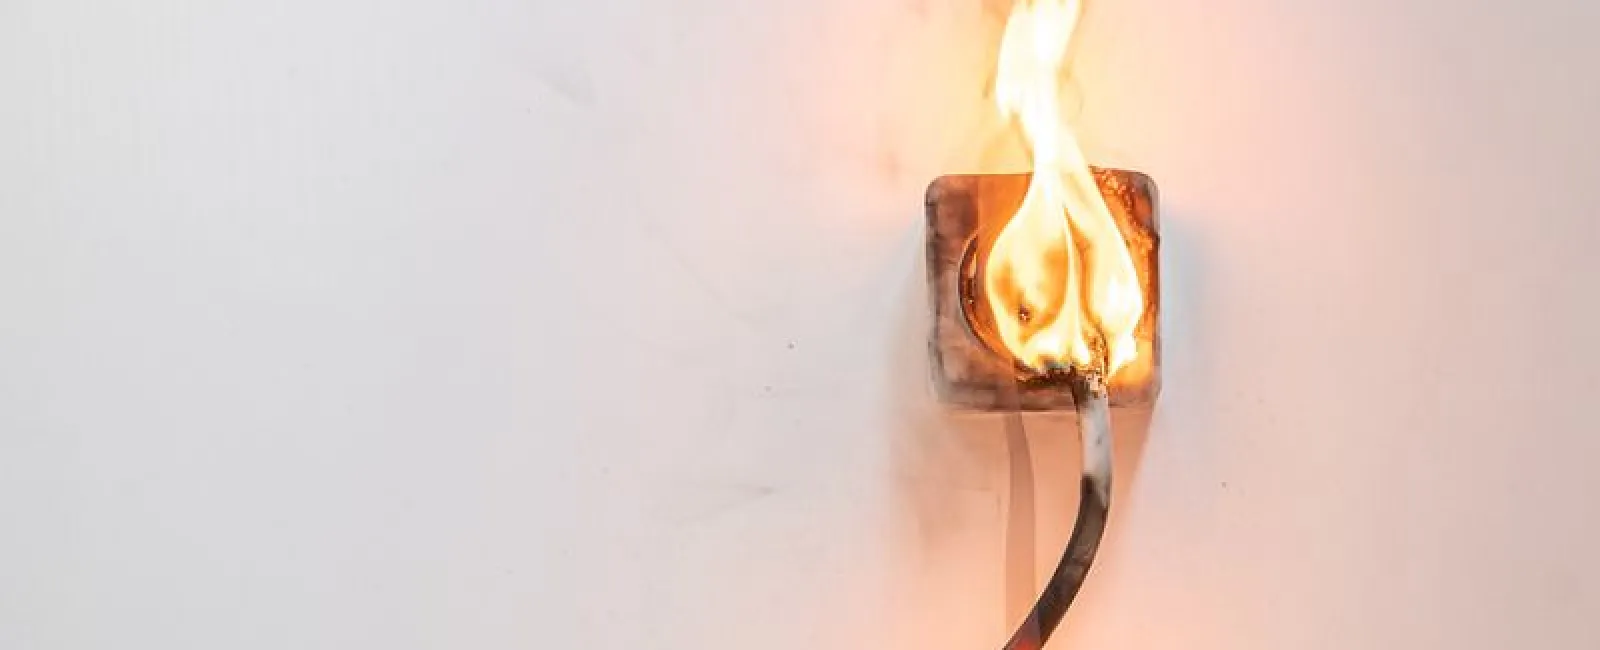 5 Biggest Electrical Hazards in Your Home